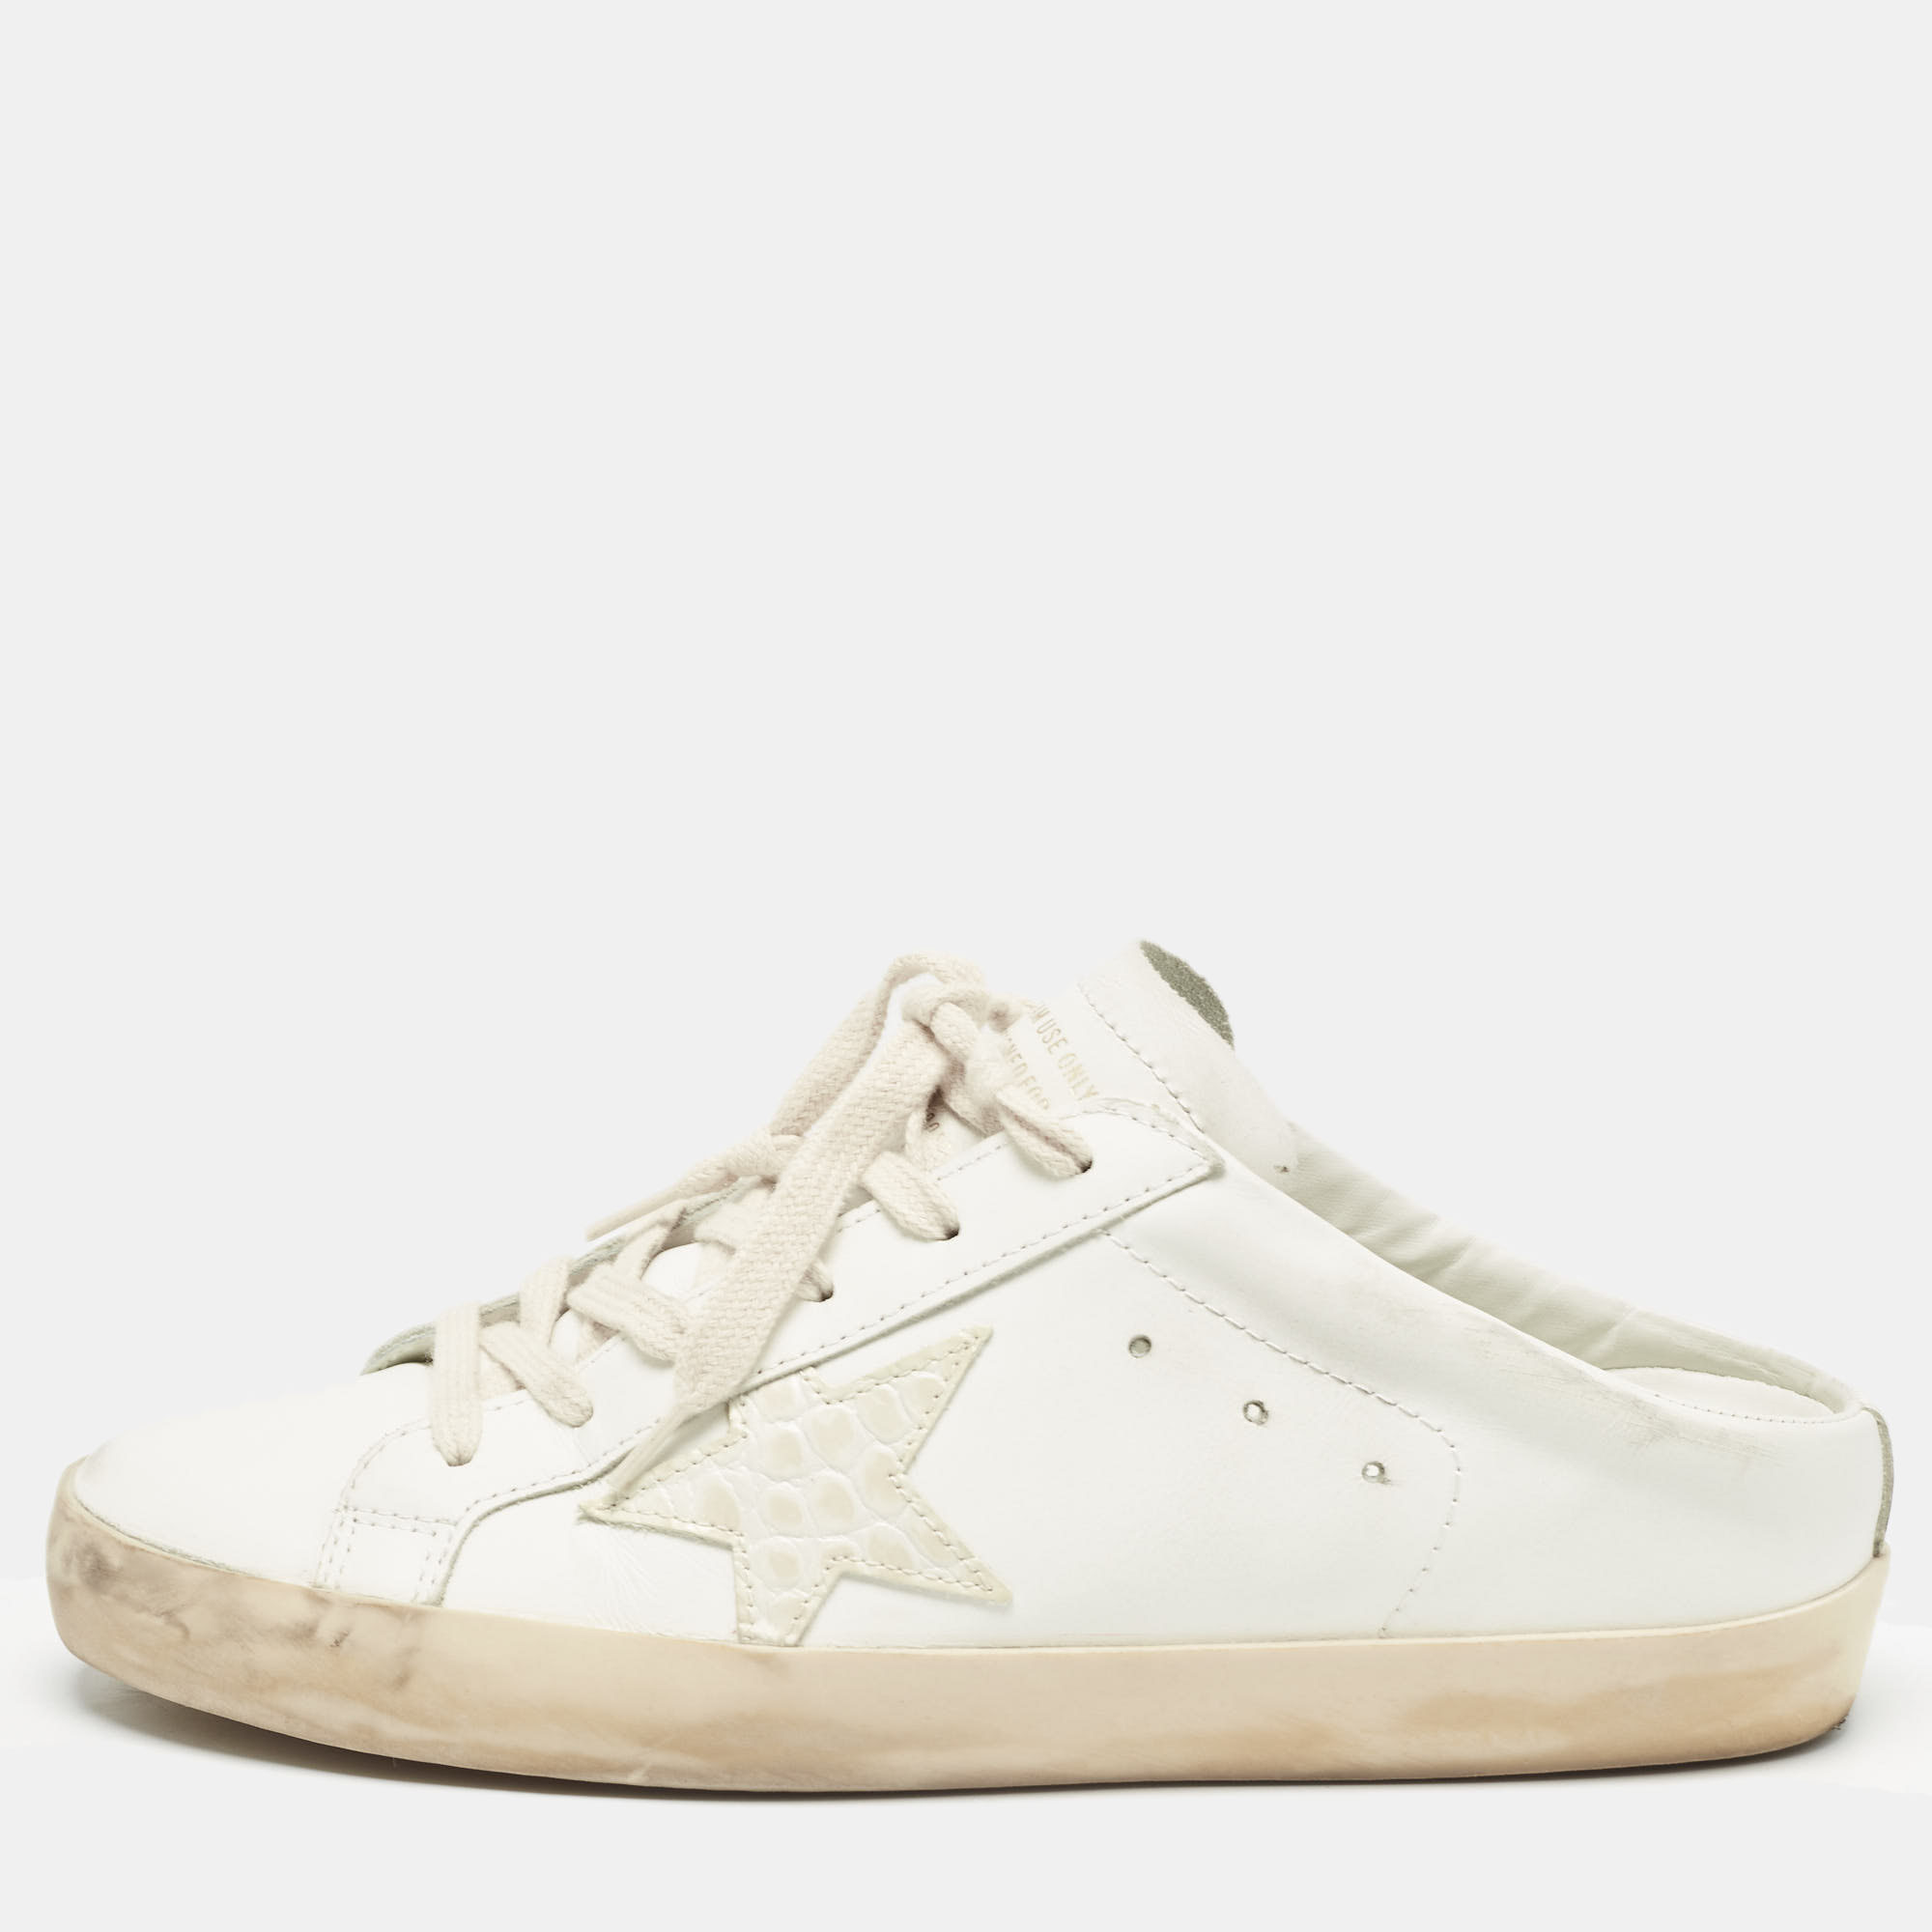 

Golden Goose White Leather and Croc Embossed Superstar Sneaker Mules Size